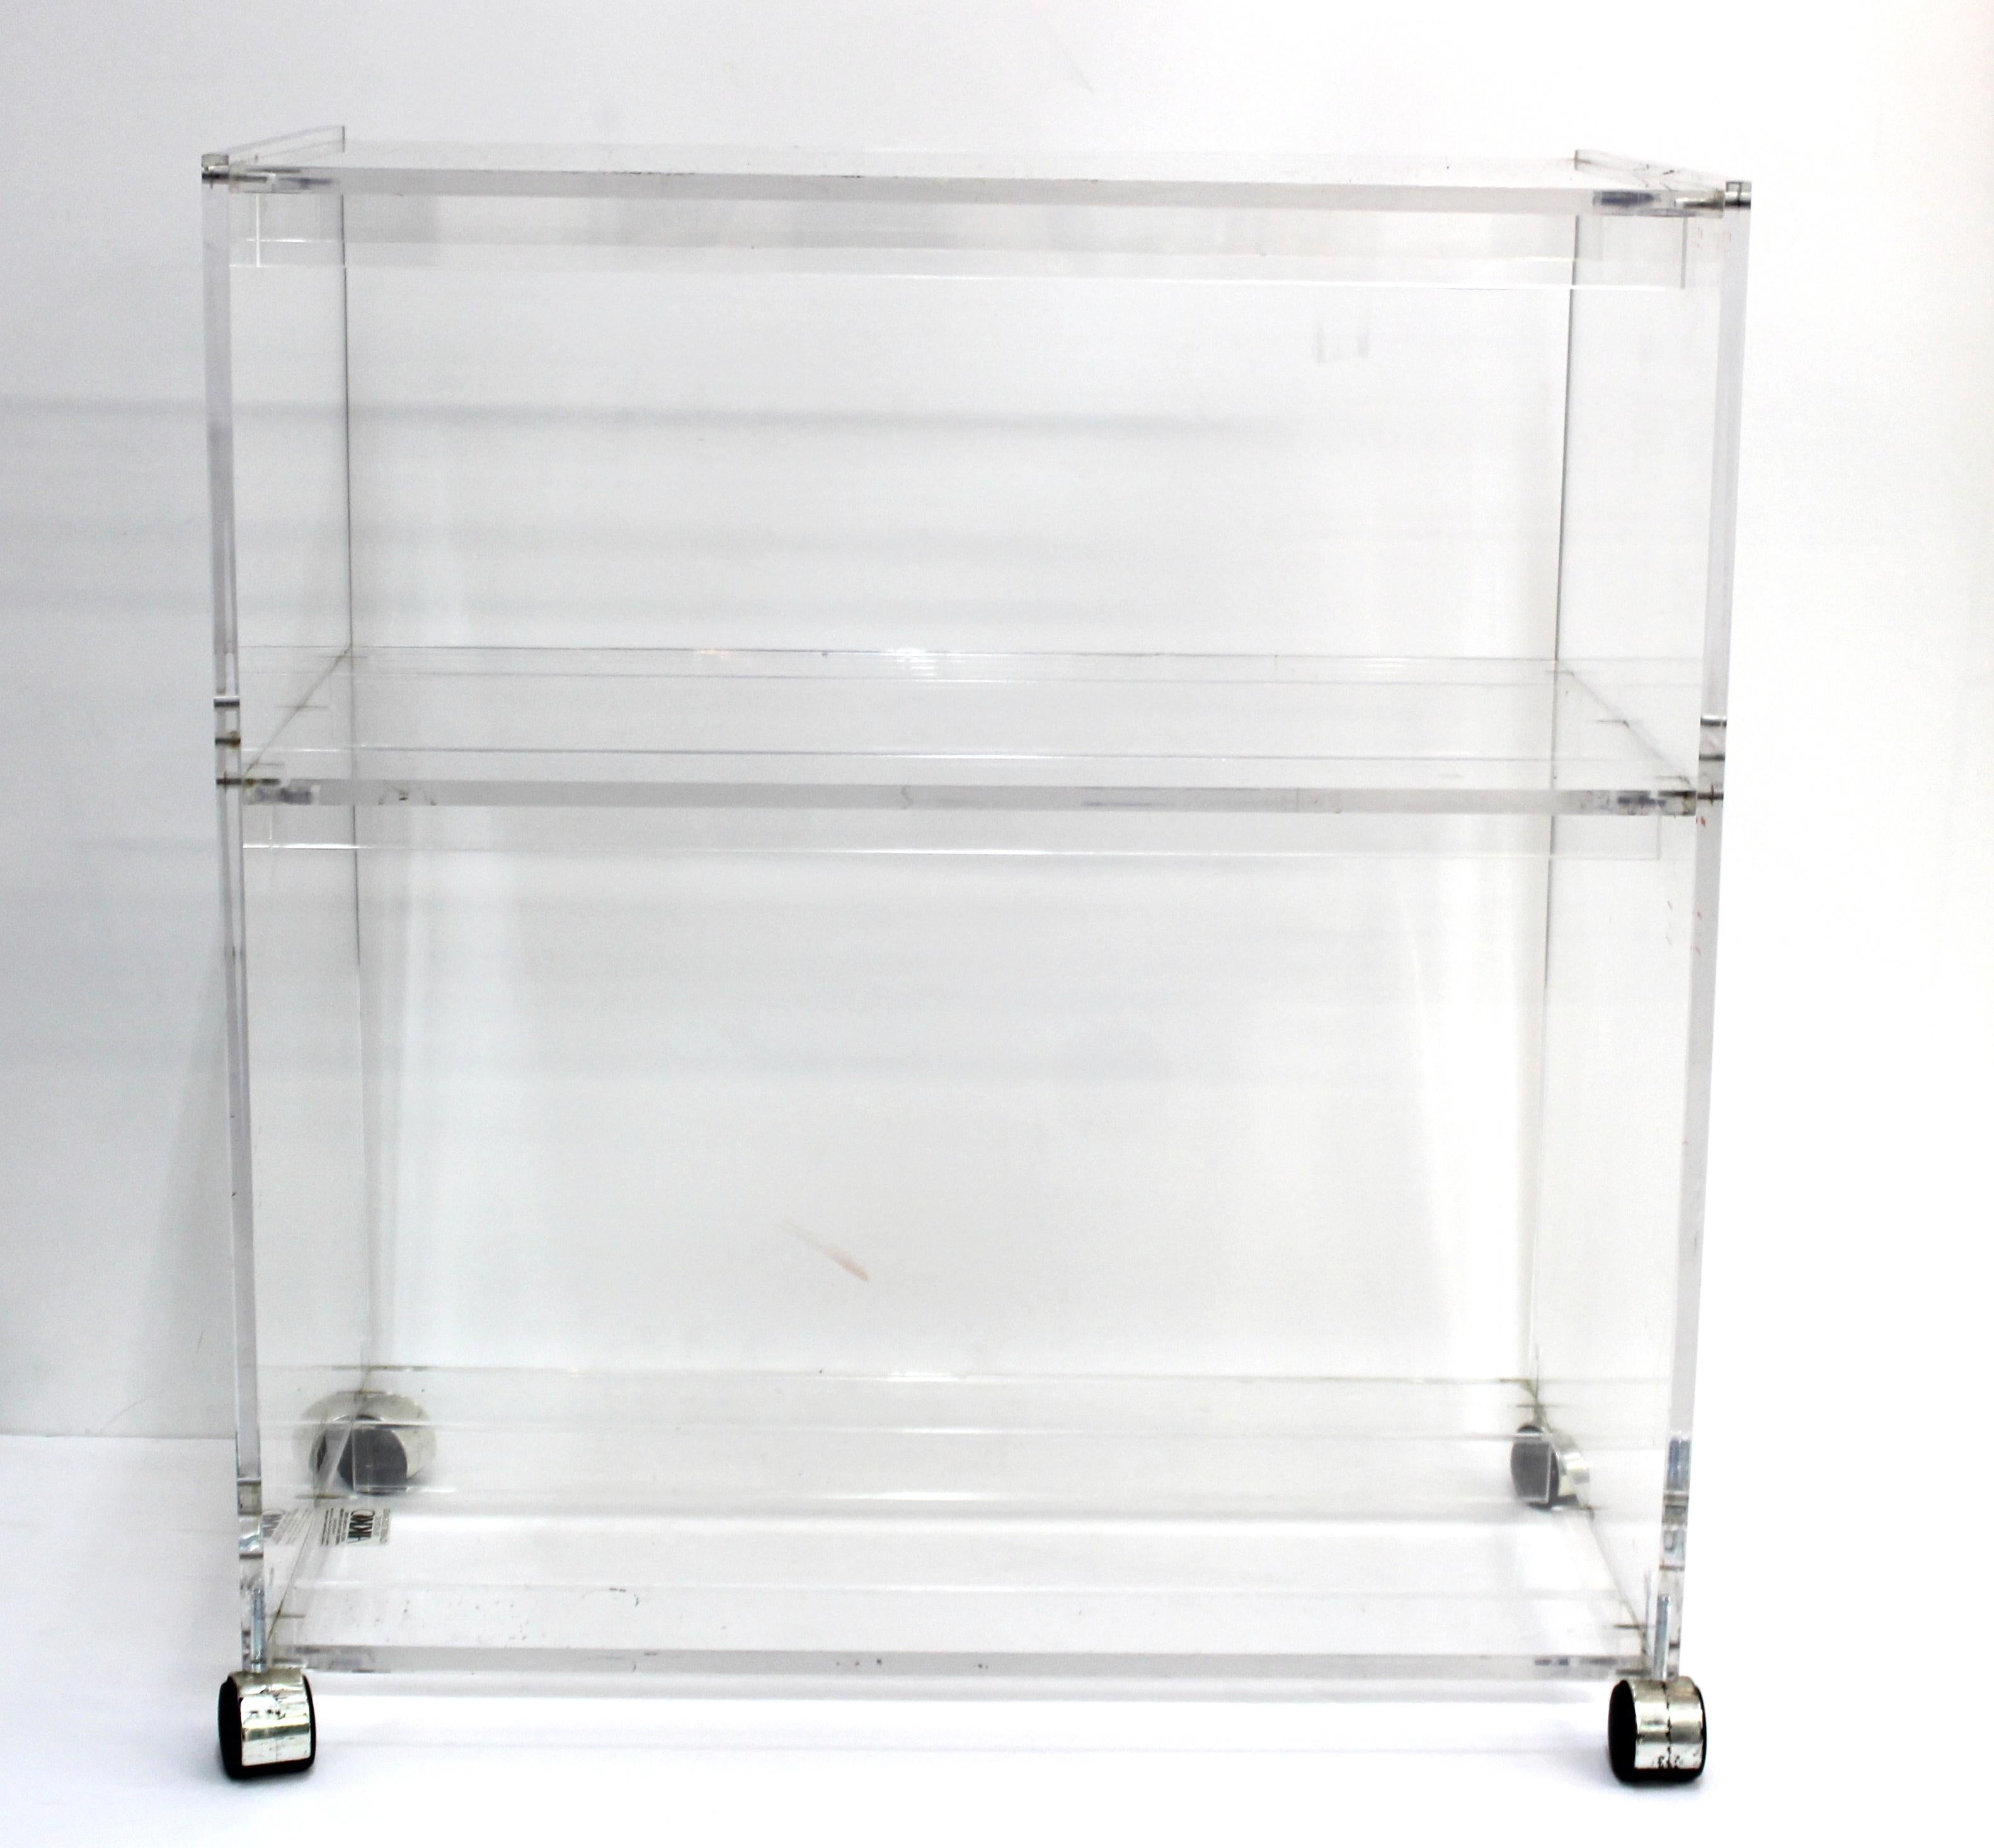 Modern acrylic serving cart or bar cart, made by AKKO in Massachusetts during the late 20th century. The piece has three storage levels and is in great vintage condition with some age-appropriate surface wear to the acrylic.